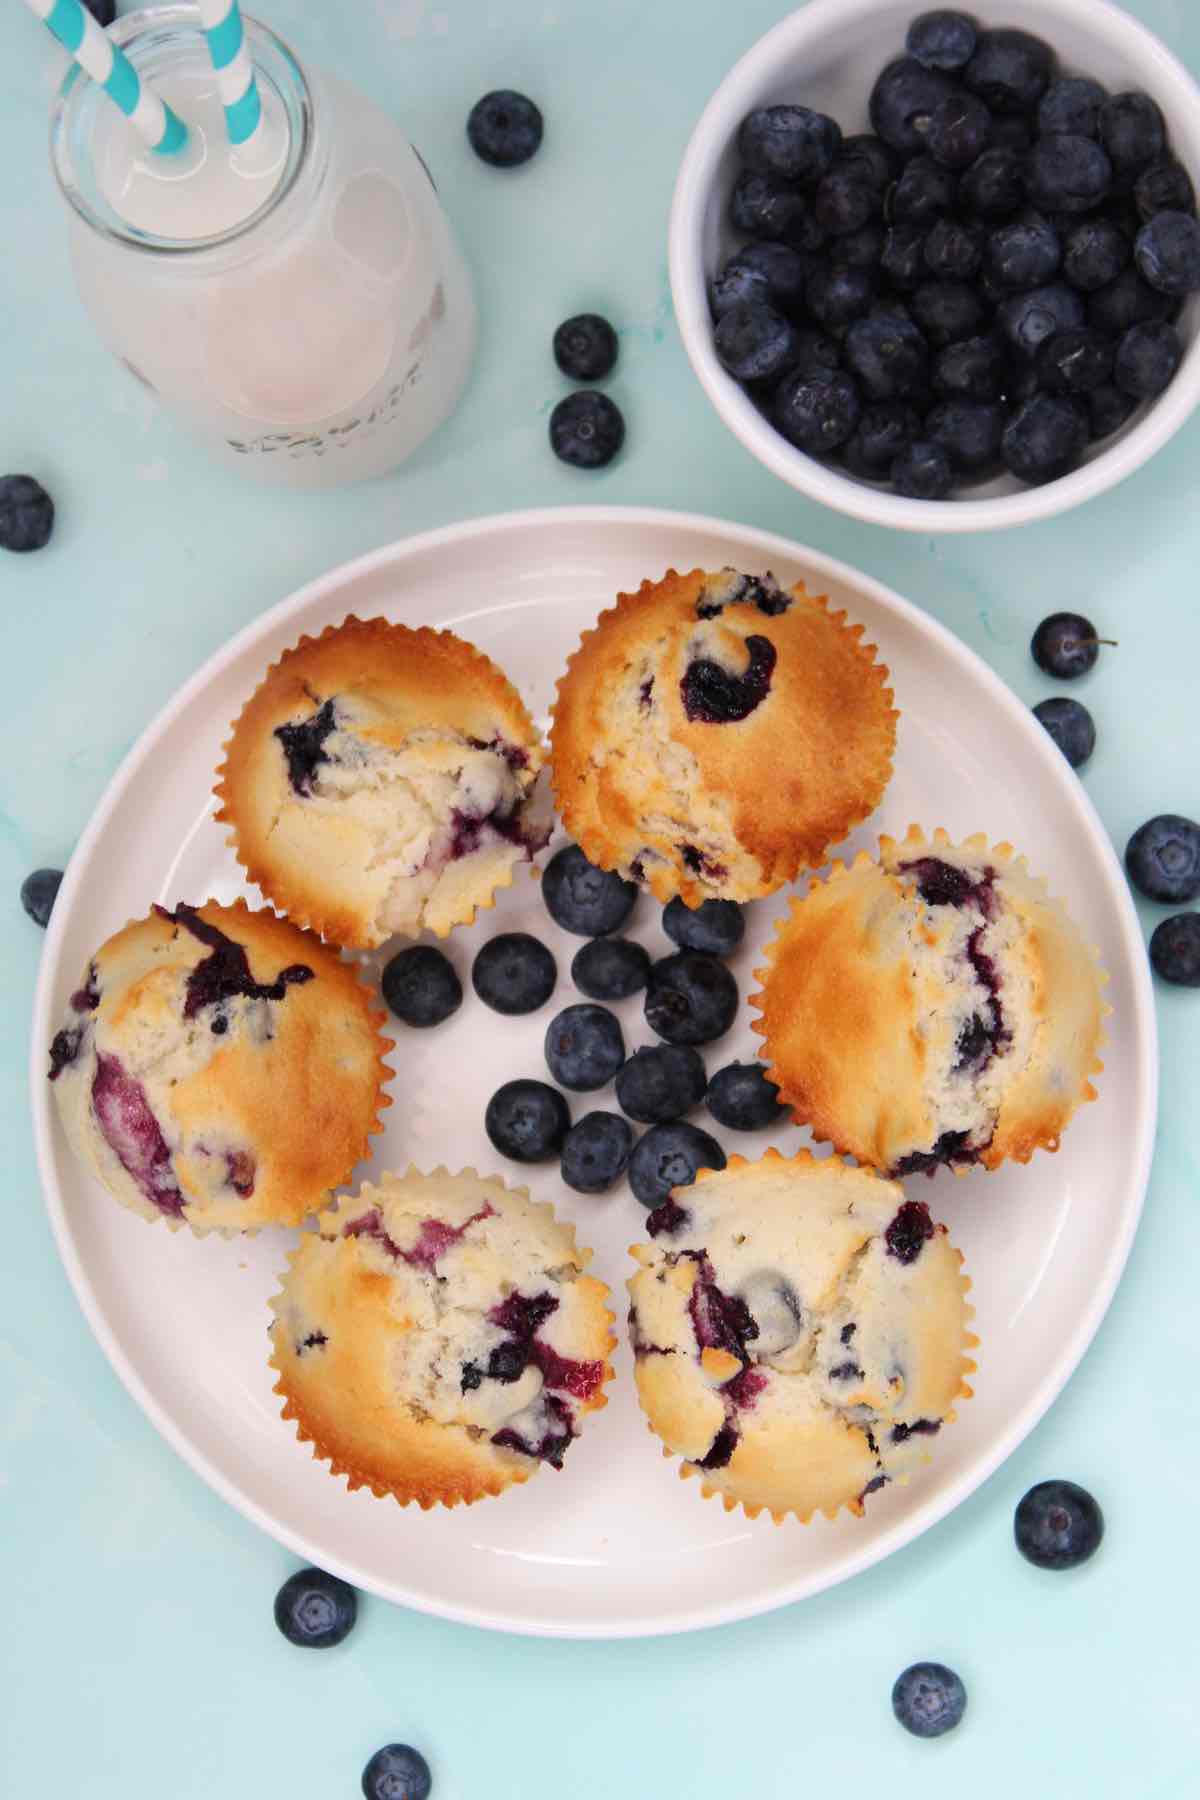 Delicious air fryer blueberry muffins recipe made from scratch.